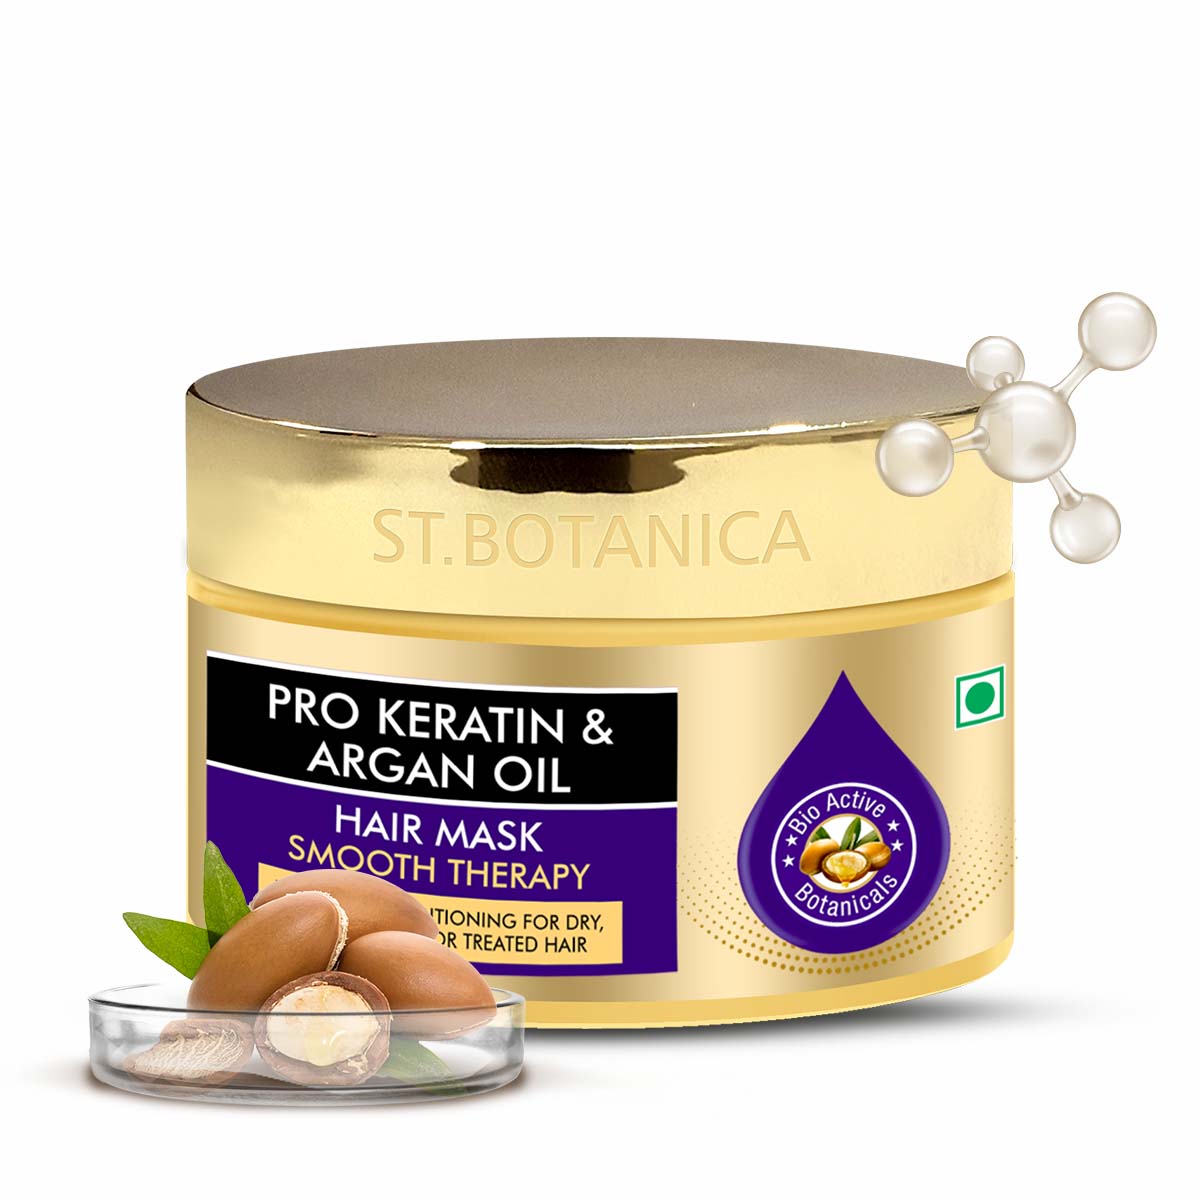 St.Botanica Pro Keratin & Argan Oil Hair Mask, Intensive Conditioning For Dry, Damaged, Color Treated Hair, 200 ml